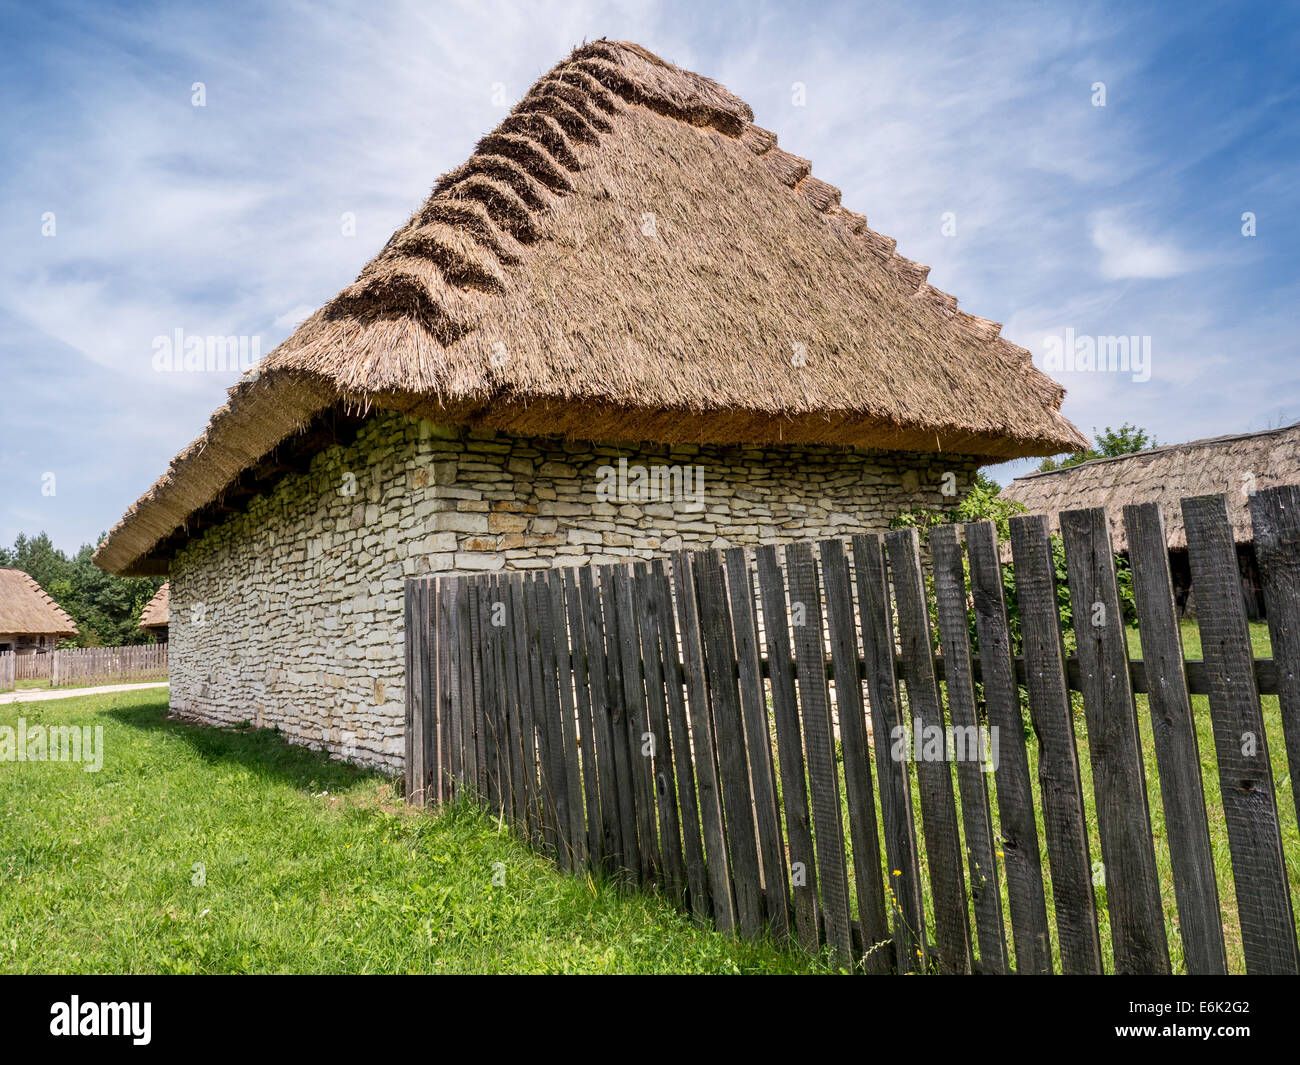 Farmstead with thatched cottage and picket fence shot against blue sky Stock Photo